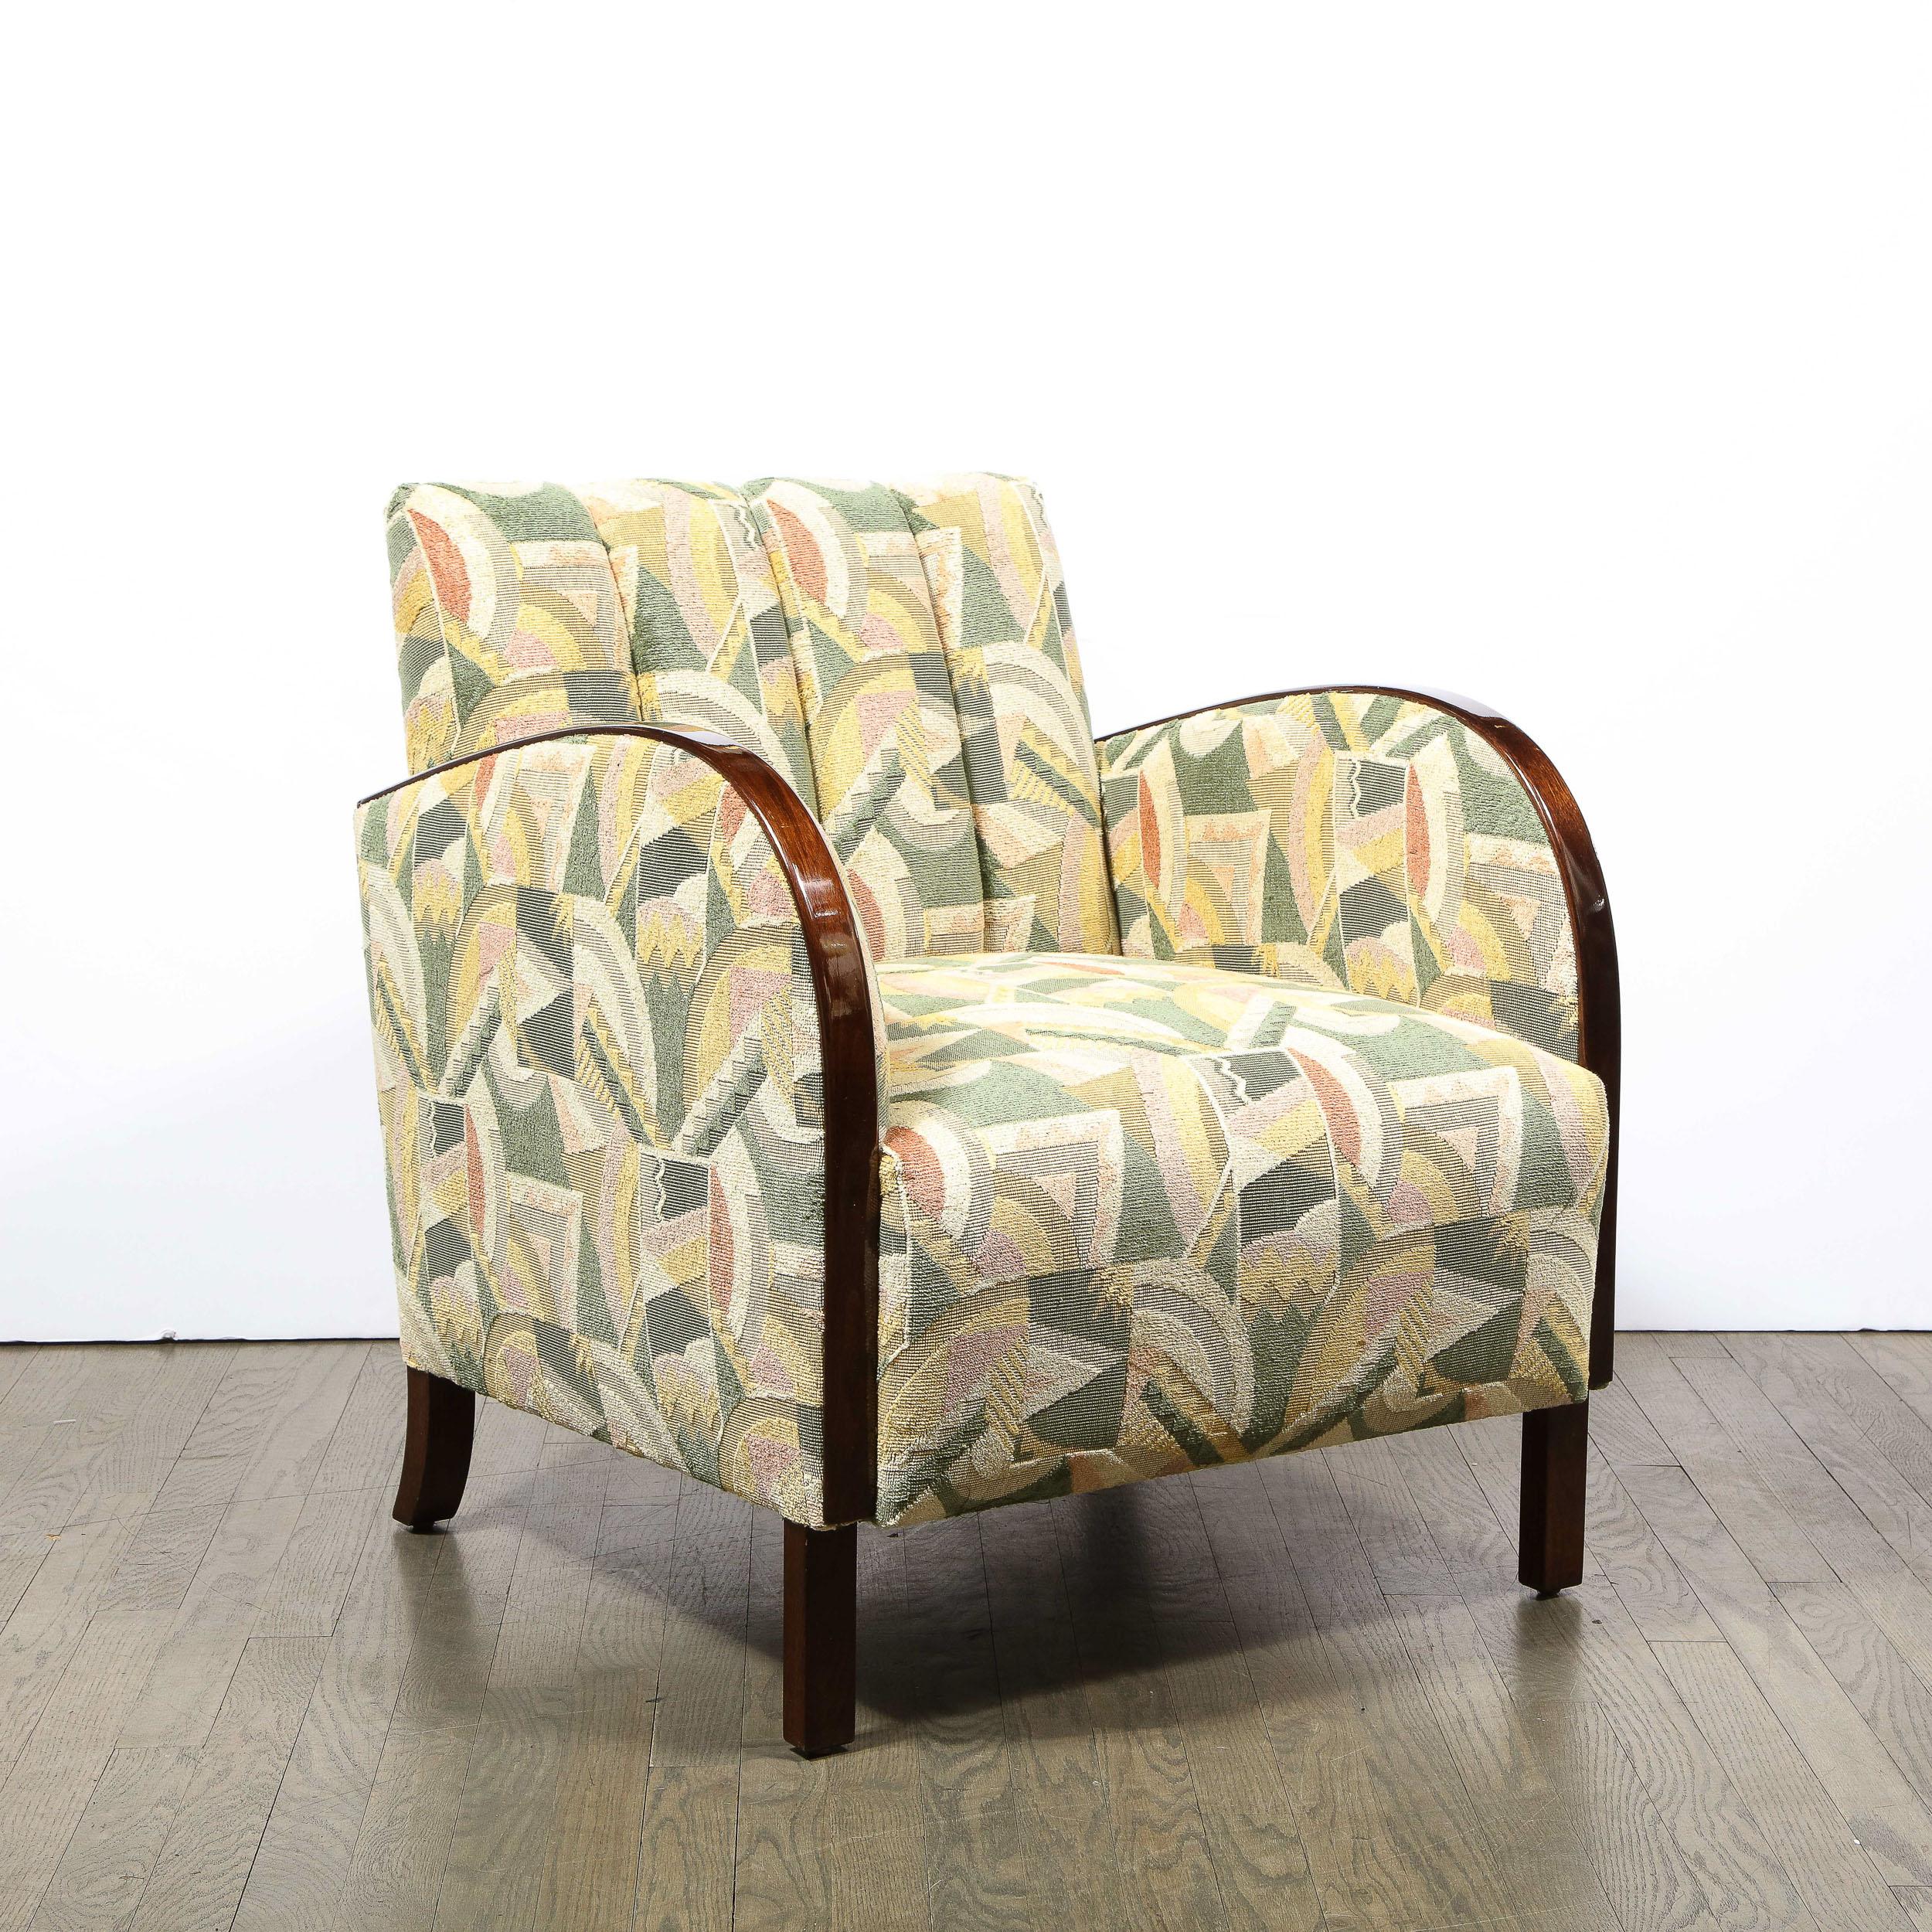 Pair of Art Deco Streamlined Walnut Club Chairs in Cubist Clarence House Fabric For Sale 7